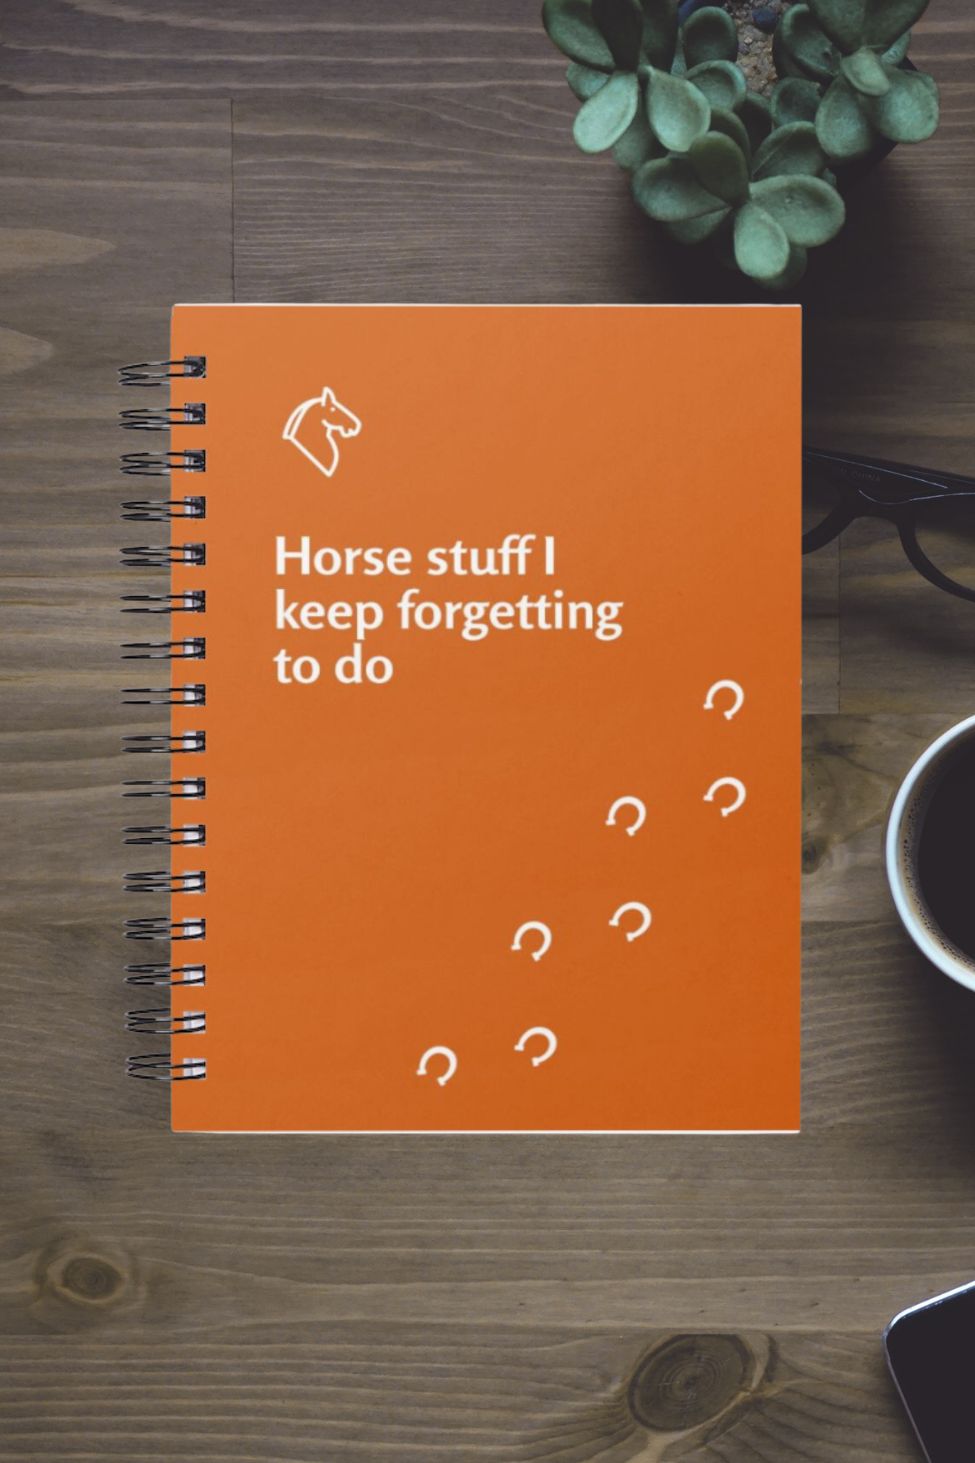 Horse stuff I keep forgetting to do - Spiral bound lined notebook